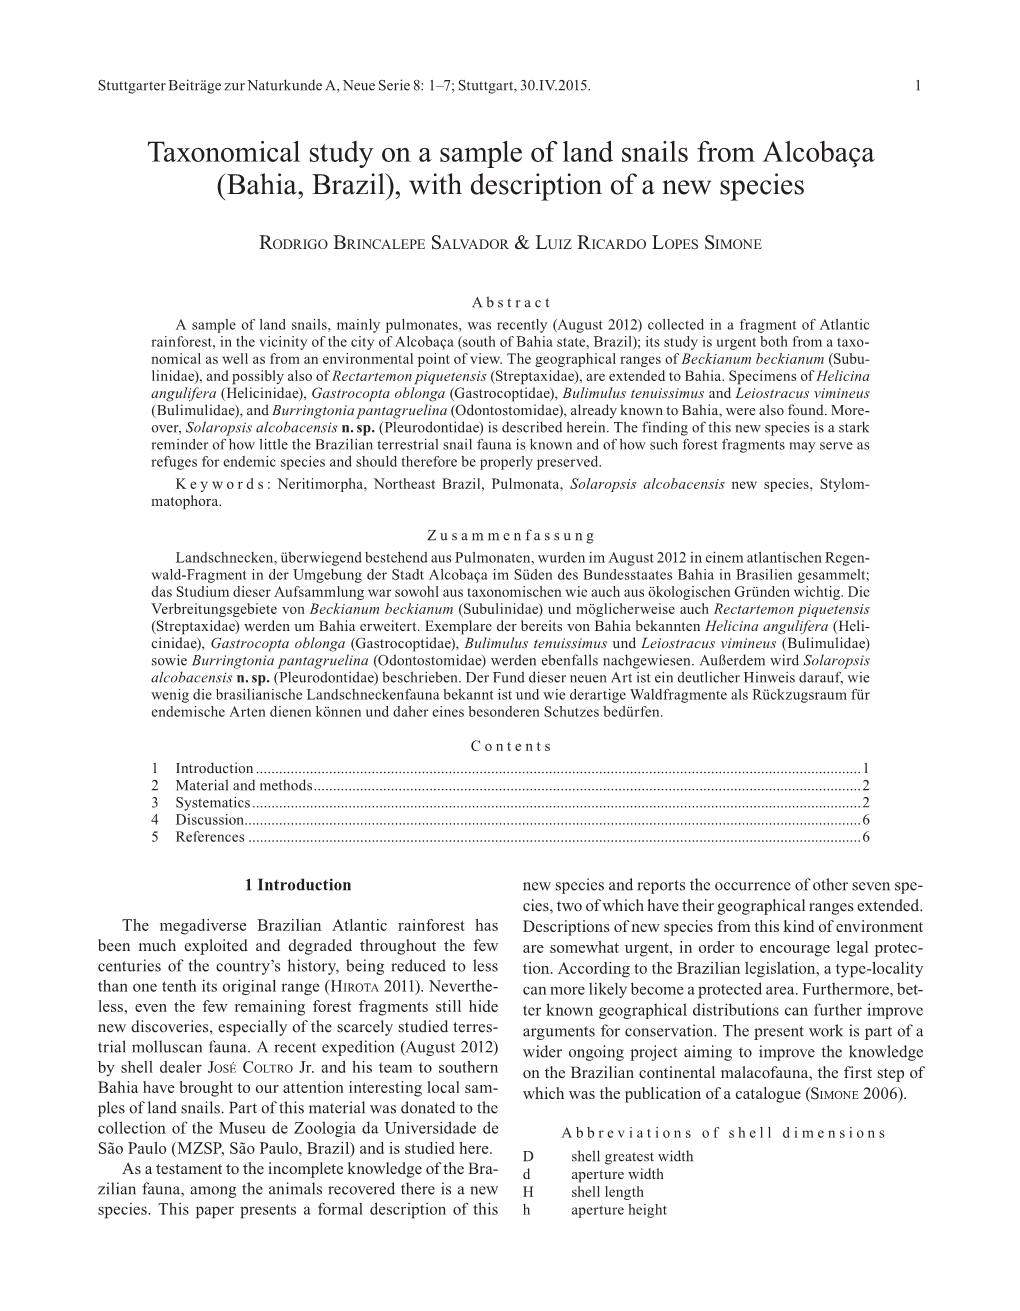 Taxonomical Study on a Sample of Land Snails from Alcobaça (Bahia, Brazil), with Description of a New Species